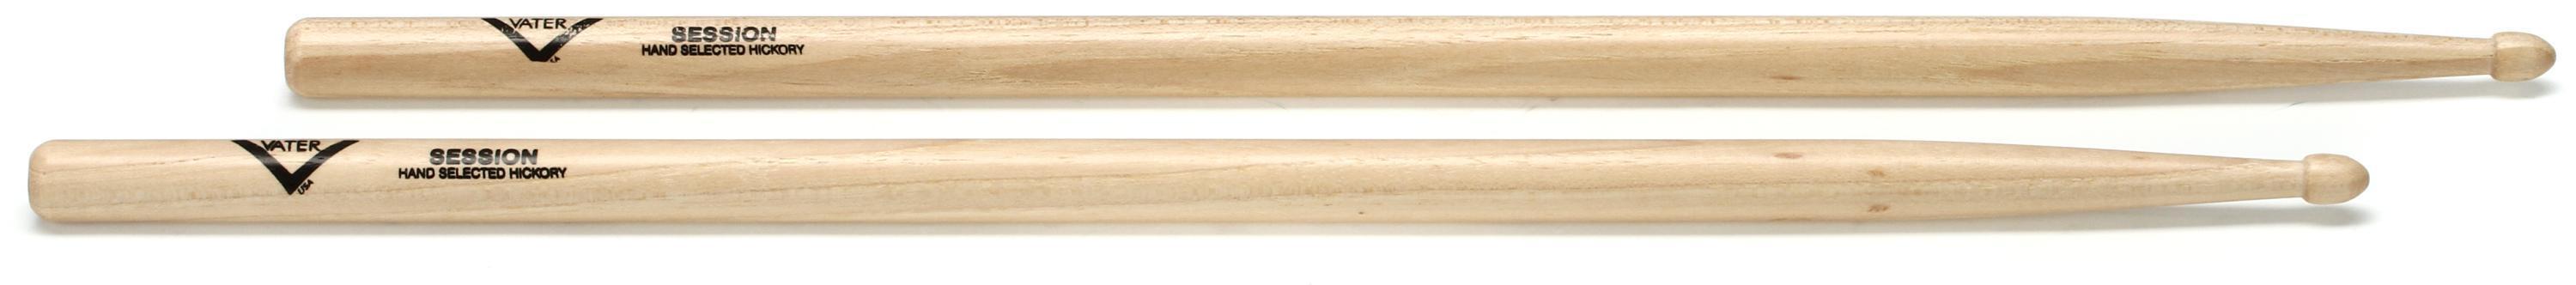 Vater American Hickory Drumsticks - Session - Wood Tip | Sweetwater